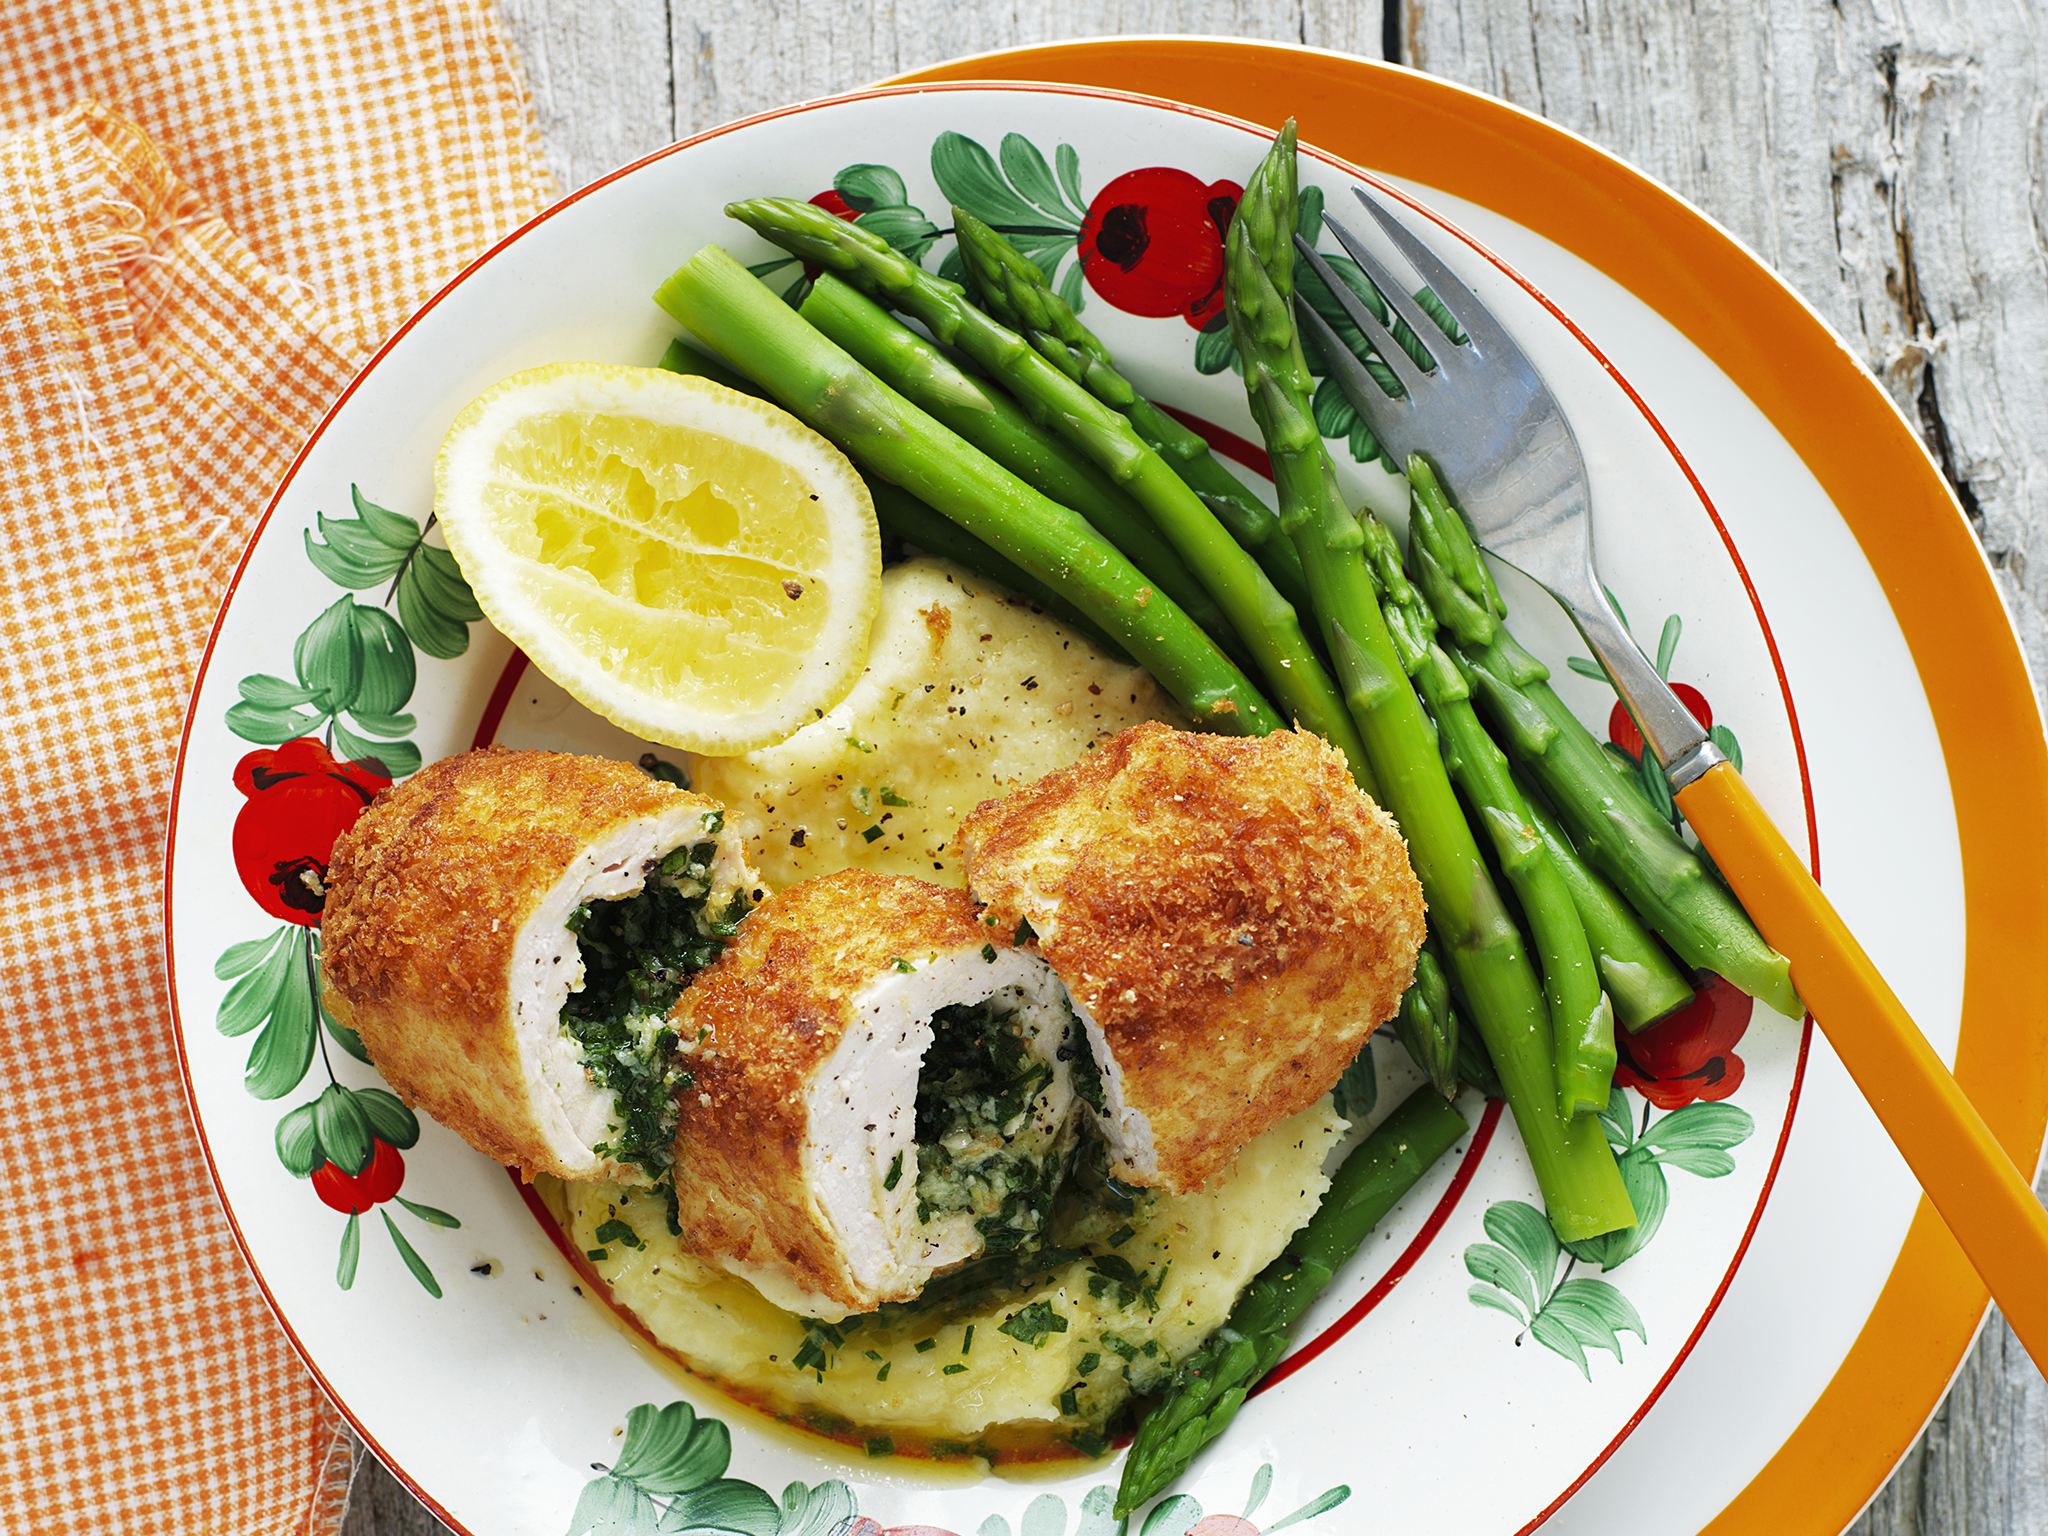 Stuffing ideas for chicken breast fillets